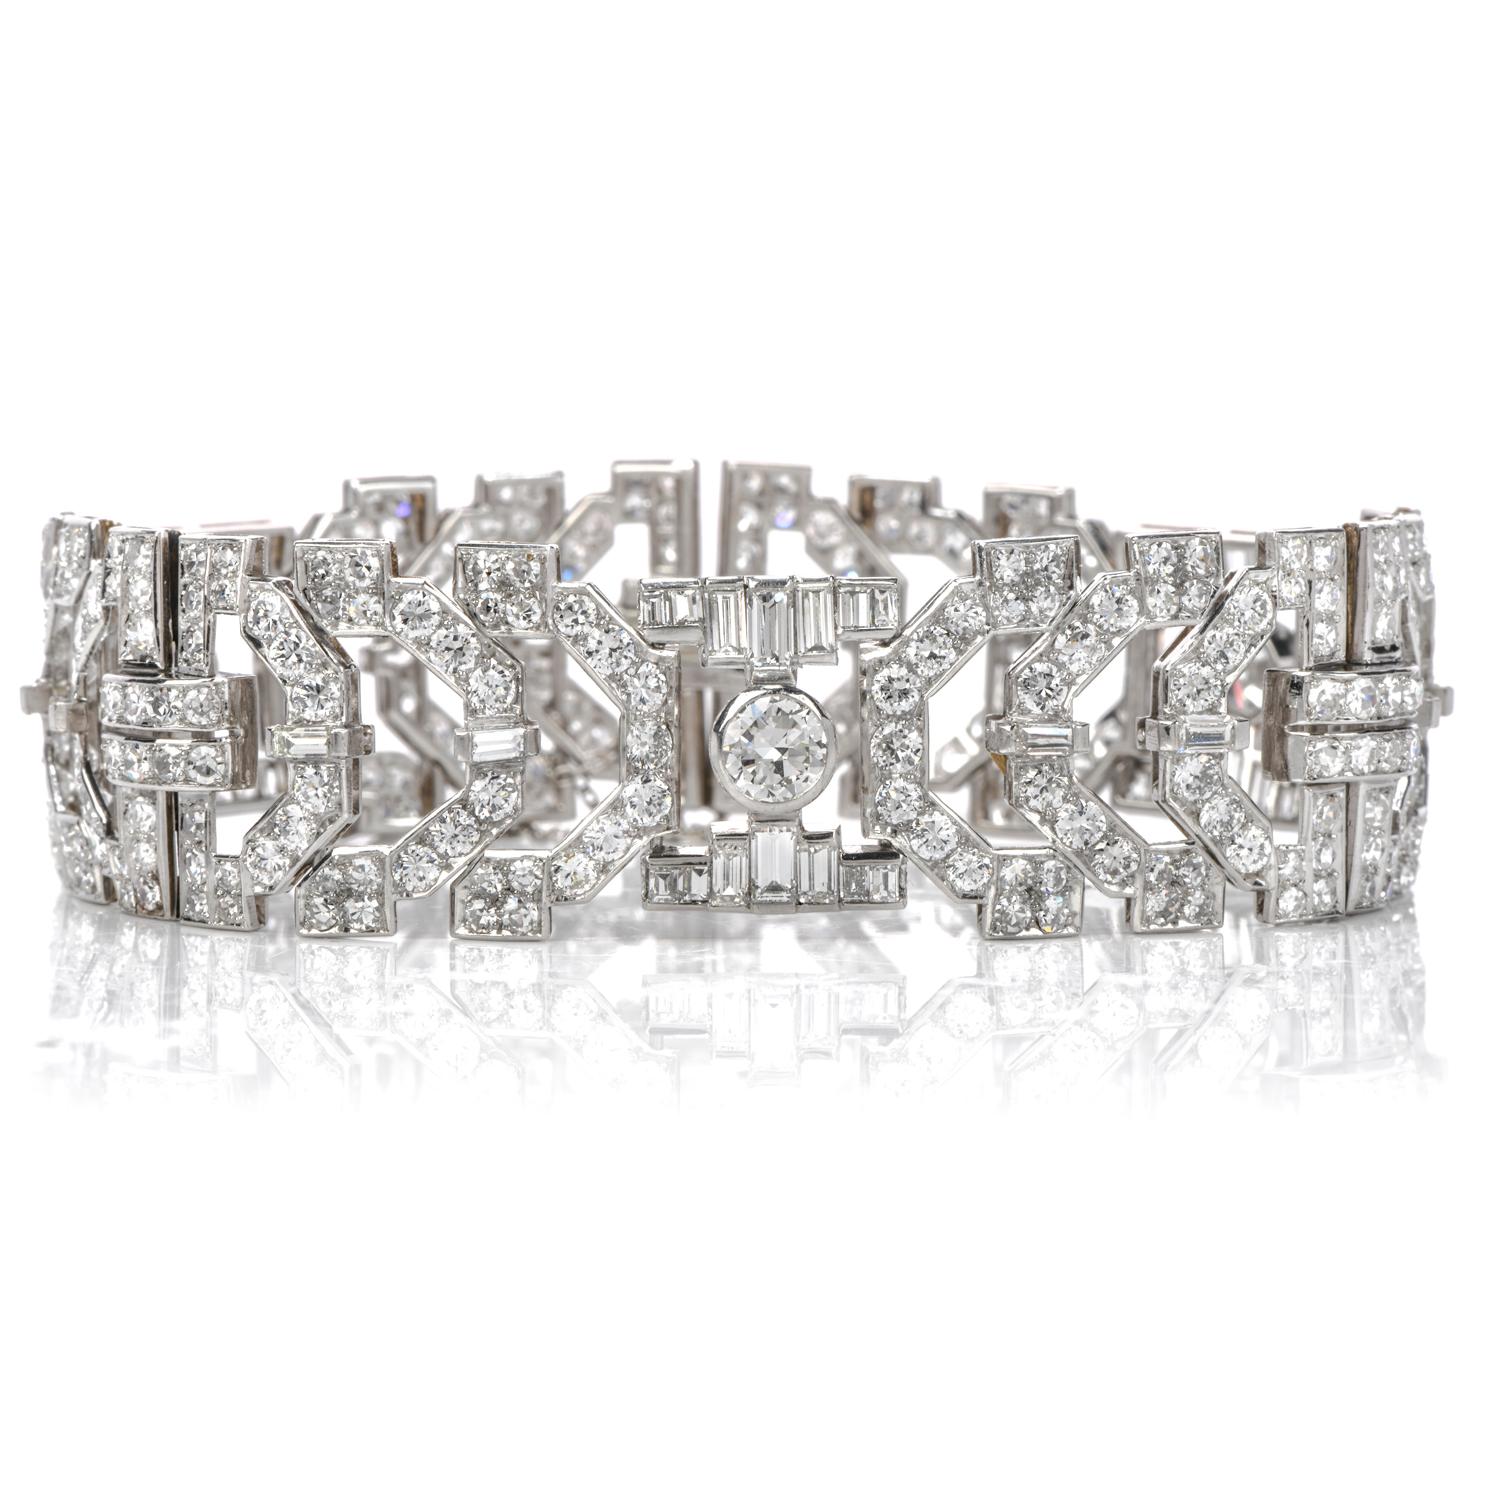  Wow yourself everyday with this stunning Vintage Diamond Platinum Round Baguette Wide French Bracelet!  
ThisArt Deco style bracelet bezel-set with three large European-cut round diamond, Weighing approx. 2.30 carats in total. G-H color, VS clarity